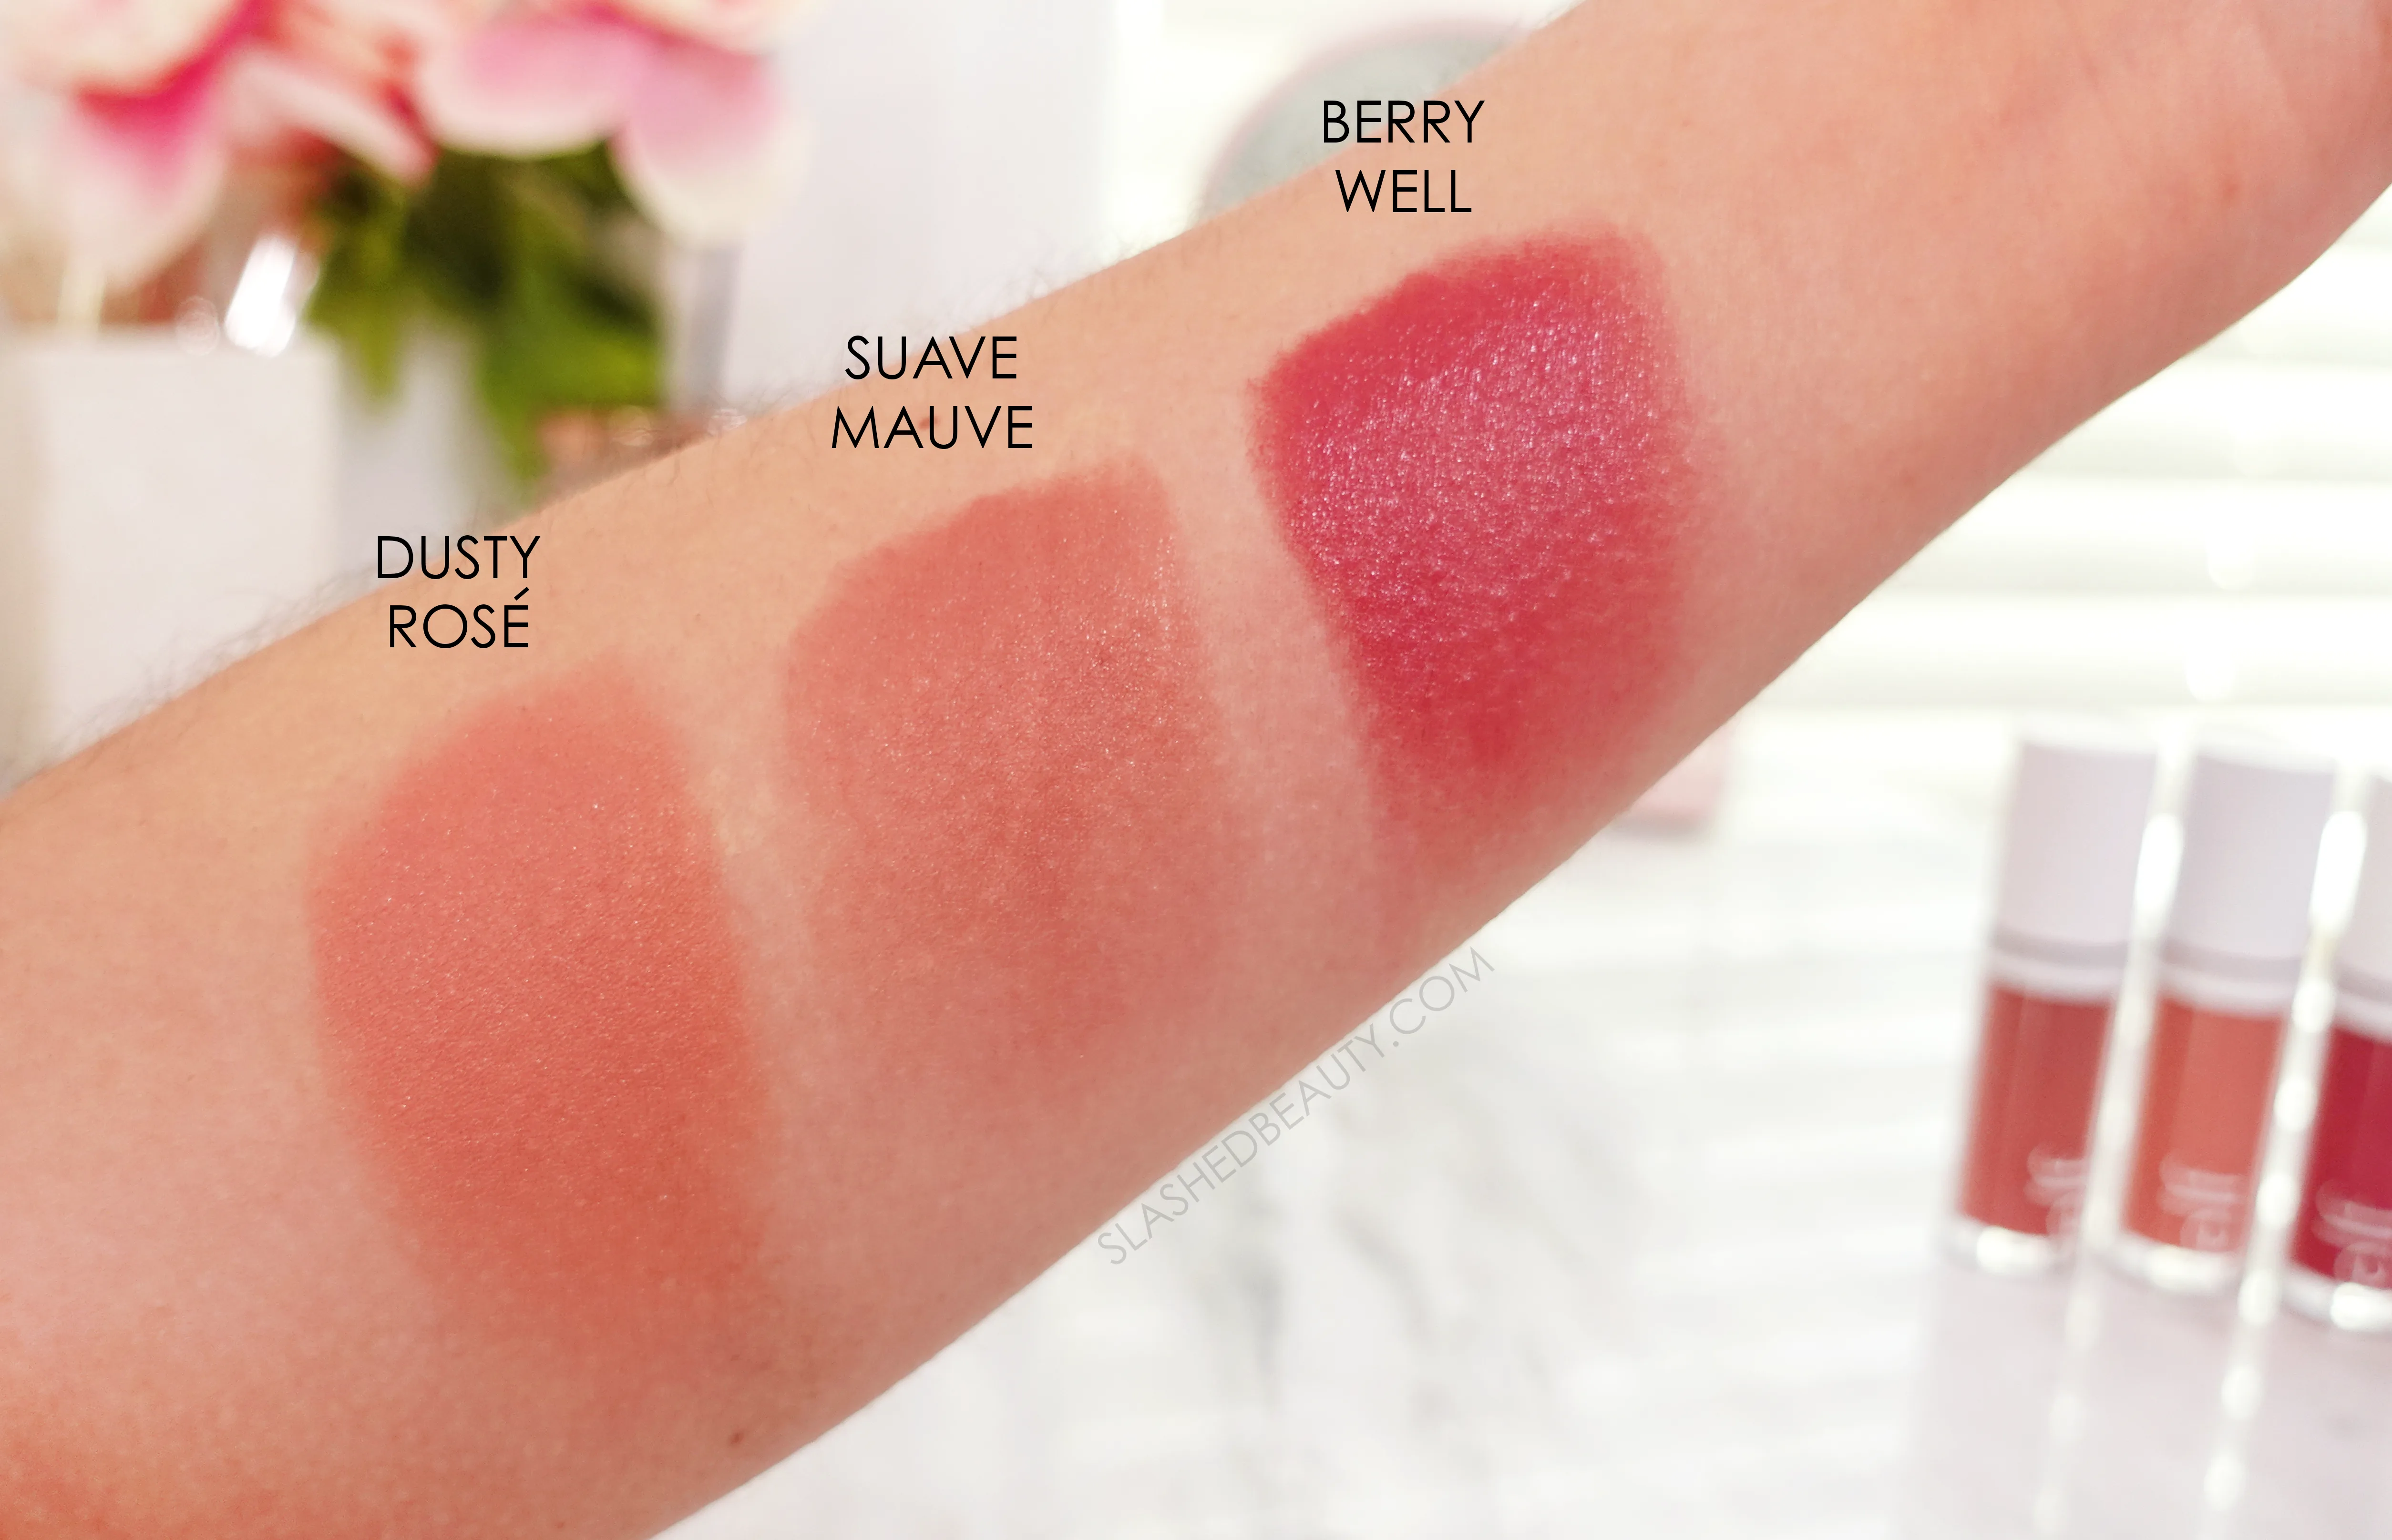 Swatches of e.l.f. Camo Liquid Blush in Dusty Rose, Suave Mauve, and Berry Well | e.l.f. Camo Liquid Blush Review | Slashed Beauty